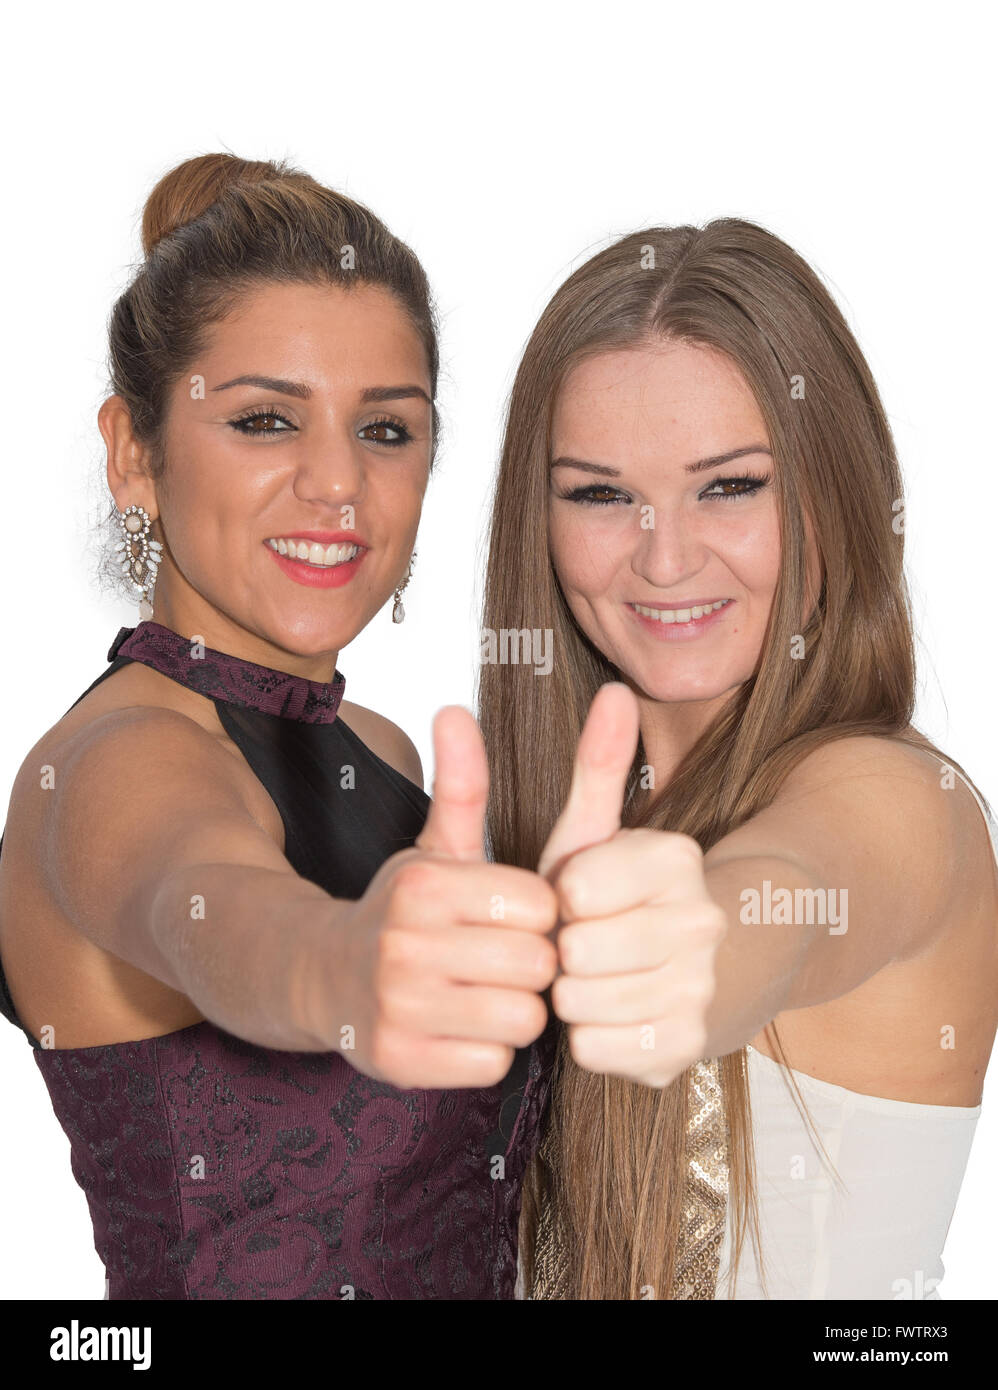 Two attrative women giving a thumbs up Stock Photo